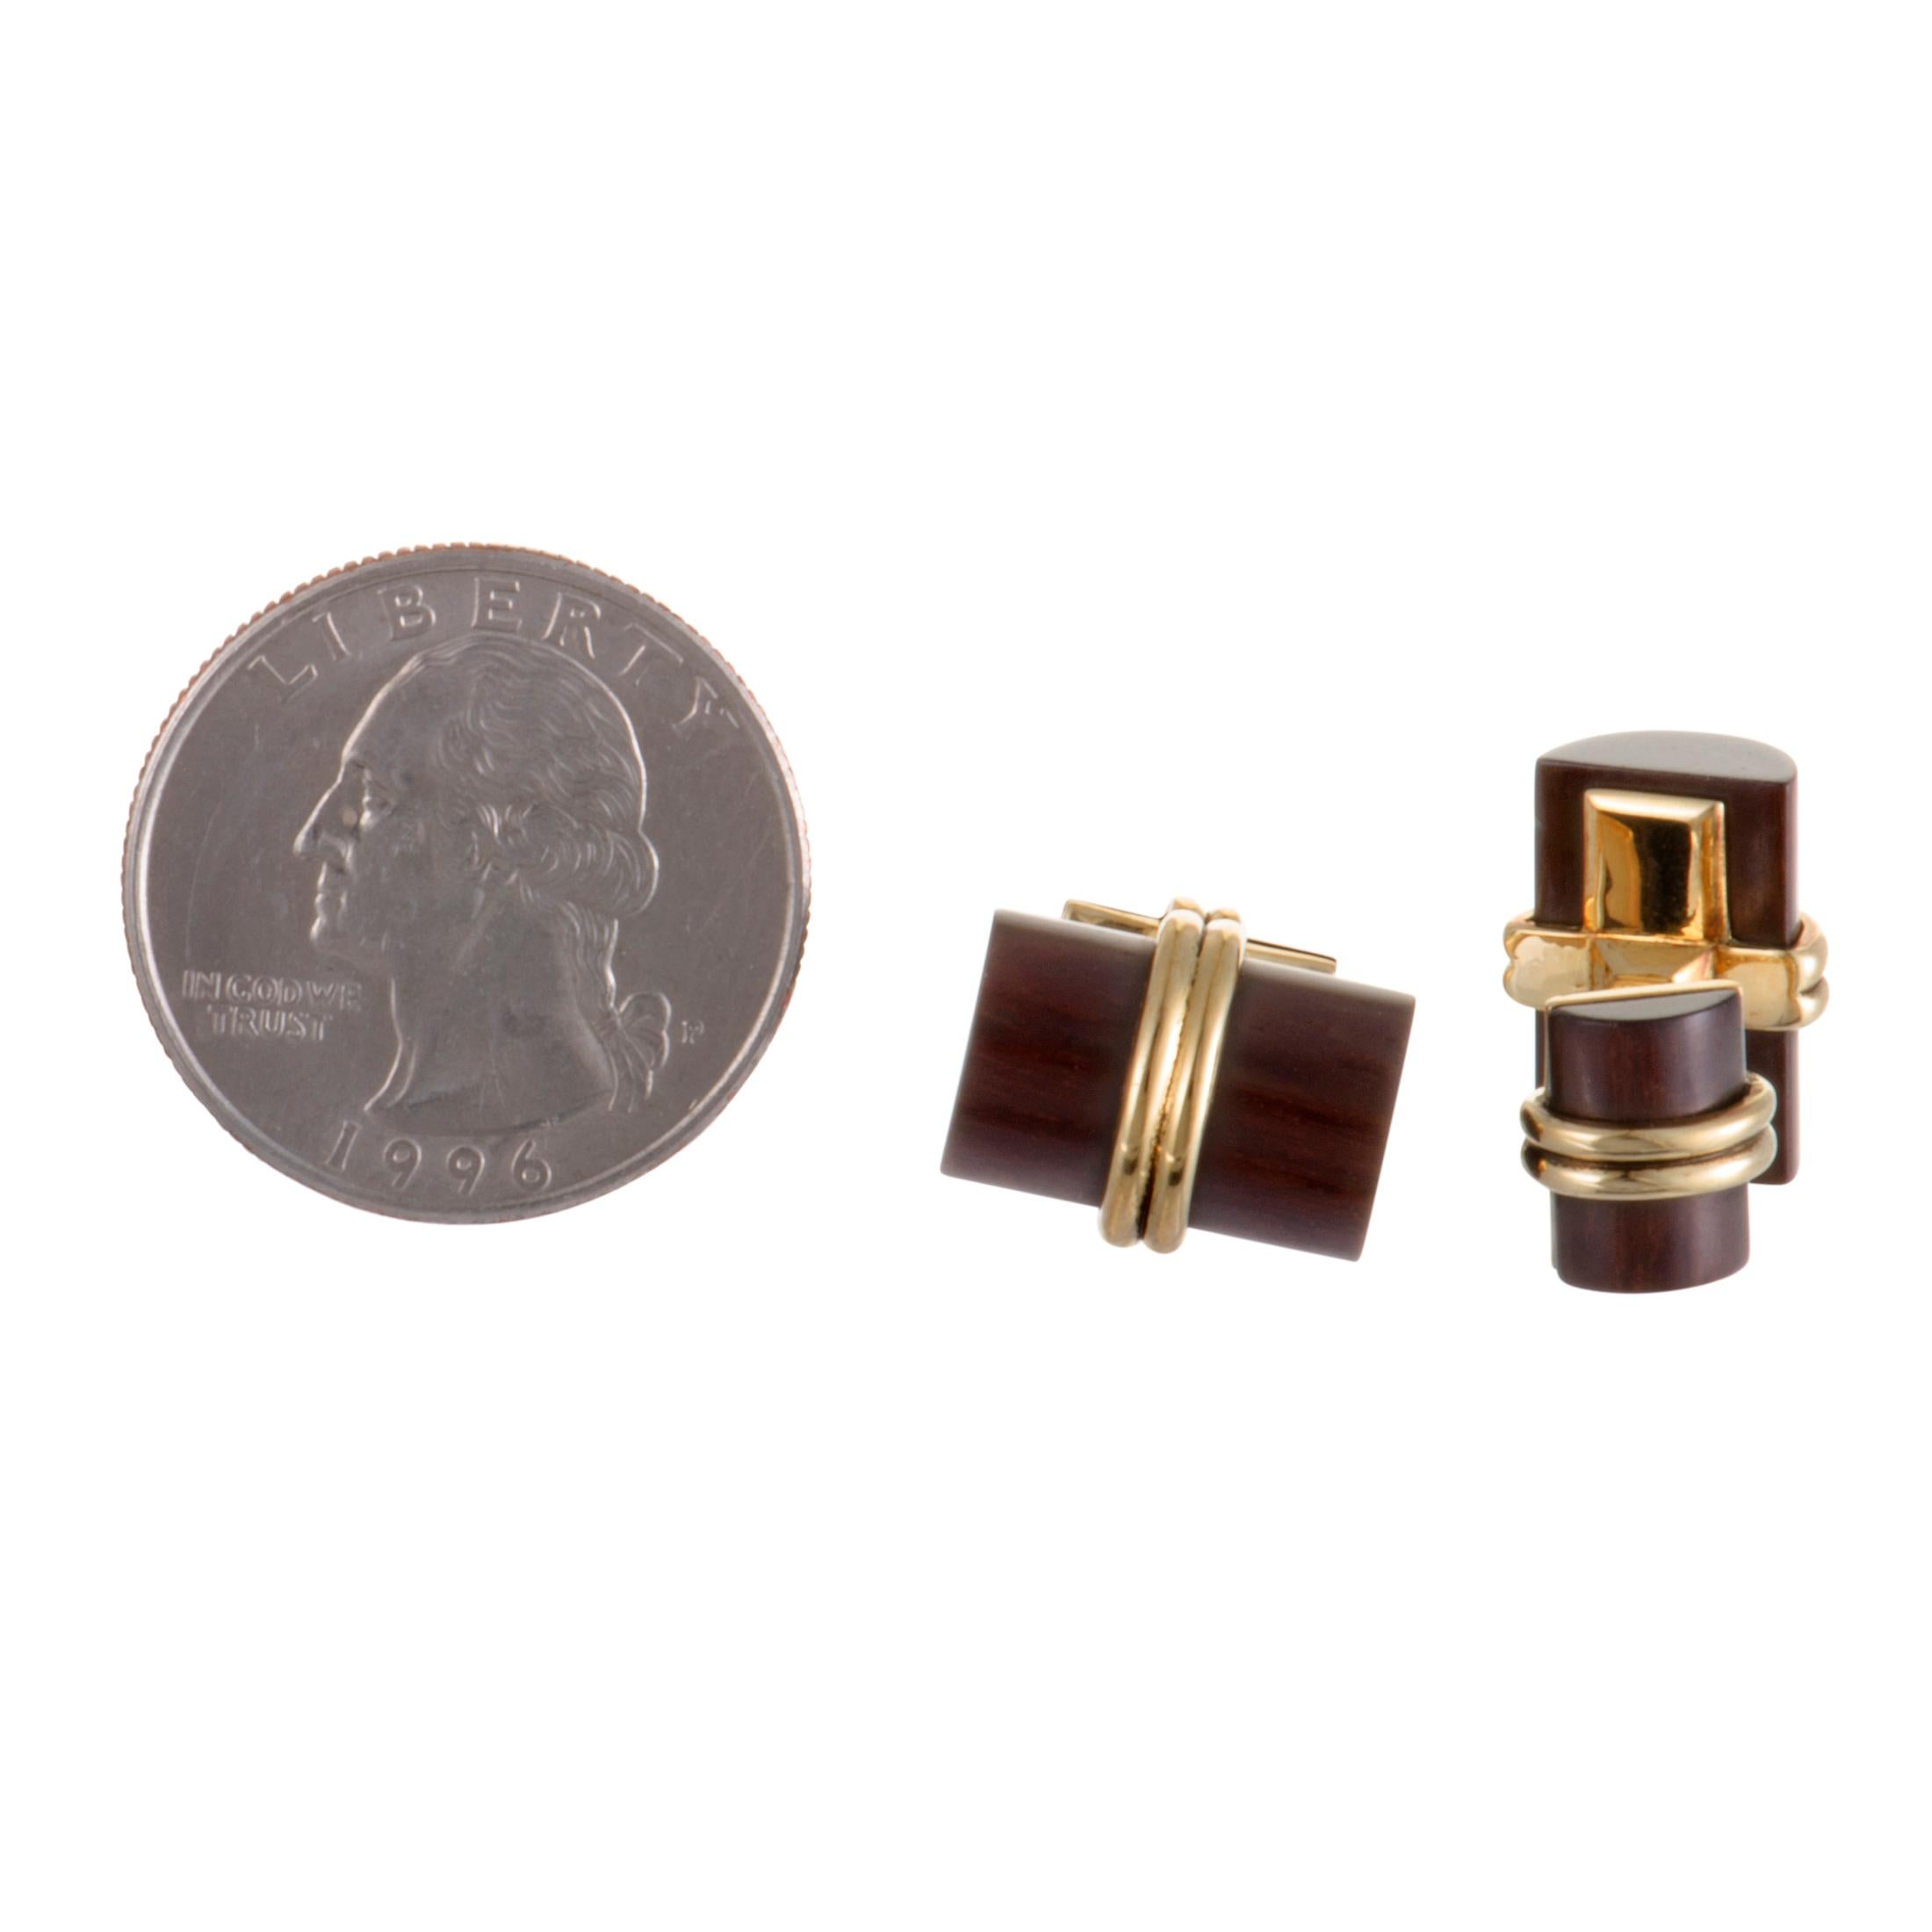 The ever-sophisticated combination of prestigious dark-toned wood and luxurious gold is featured in these exceptional Van Cleef & Arpels cufflinks that will add a refined touch to any attire. The cufflinks are made of attractive 18K yellow gold and